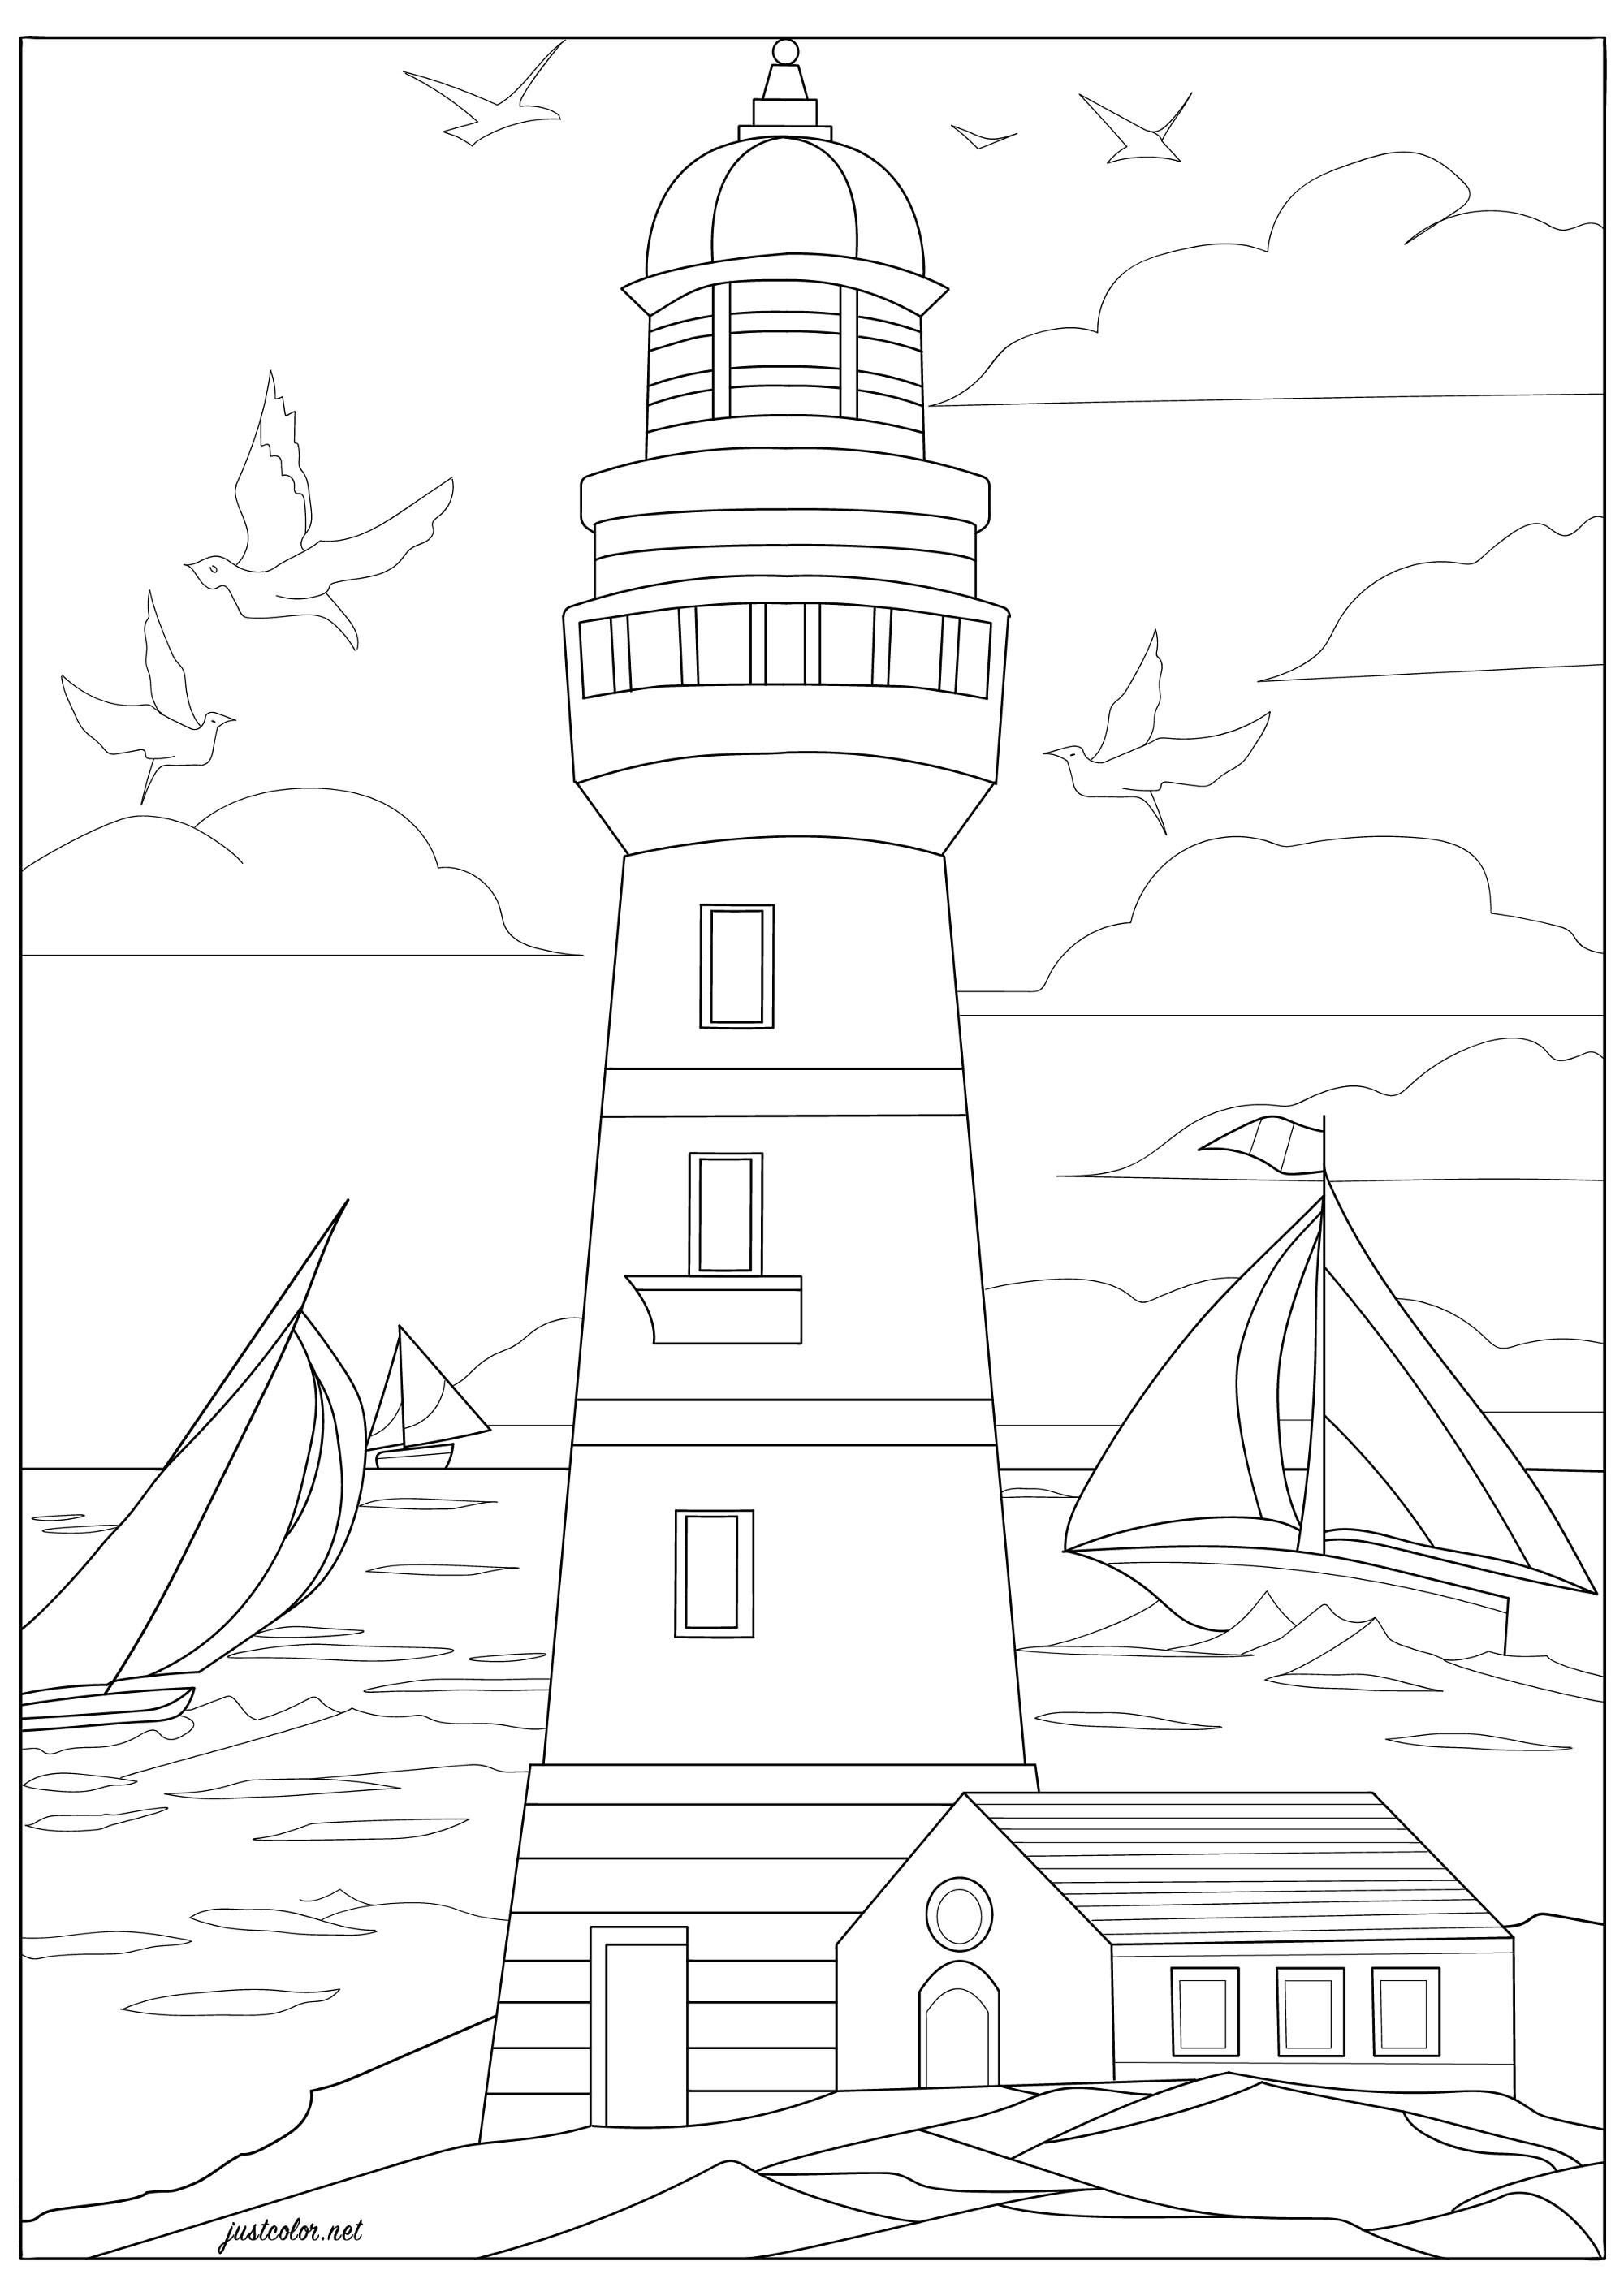 Vacations in Brittany. Lighthouse and keeper's house, pretty seagulls, sailboats and a beautiful seascape, Artist : Morgan